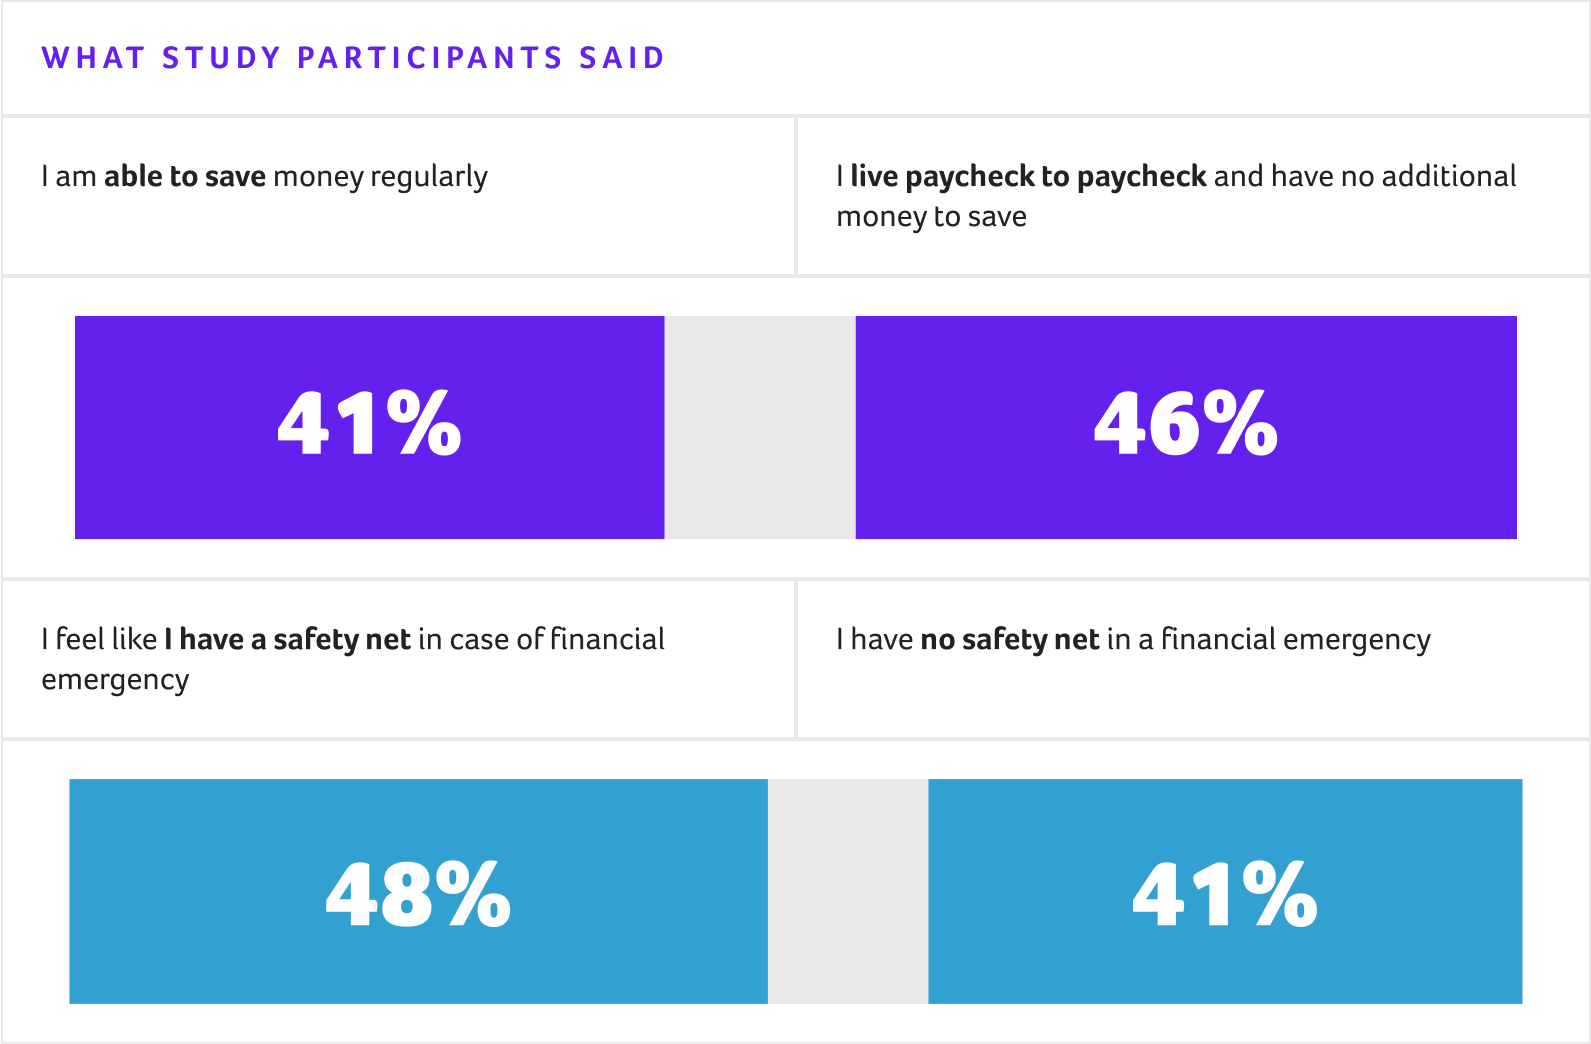 study results chart titled What Study Participants Said with chart indicating 41% of people surveyed indicating "I am able to save money regularly" compared to 46% indicating "I live paycheck to paycheck and have no additional money to save." 48 percent of participants indicate "I feel like I have a safety net in case of financial emergency" compared to 41% saying "I have no safety net in a financial emergency."